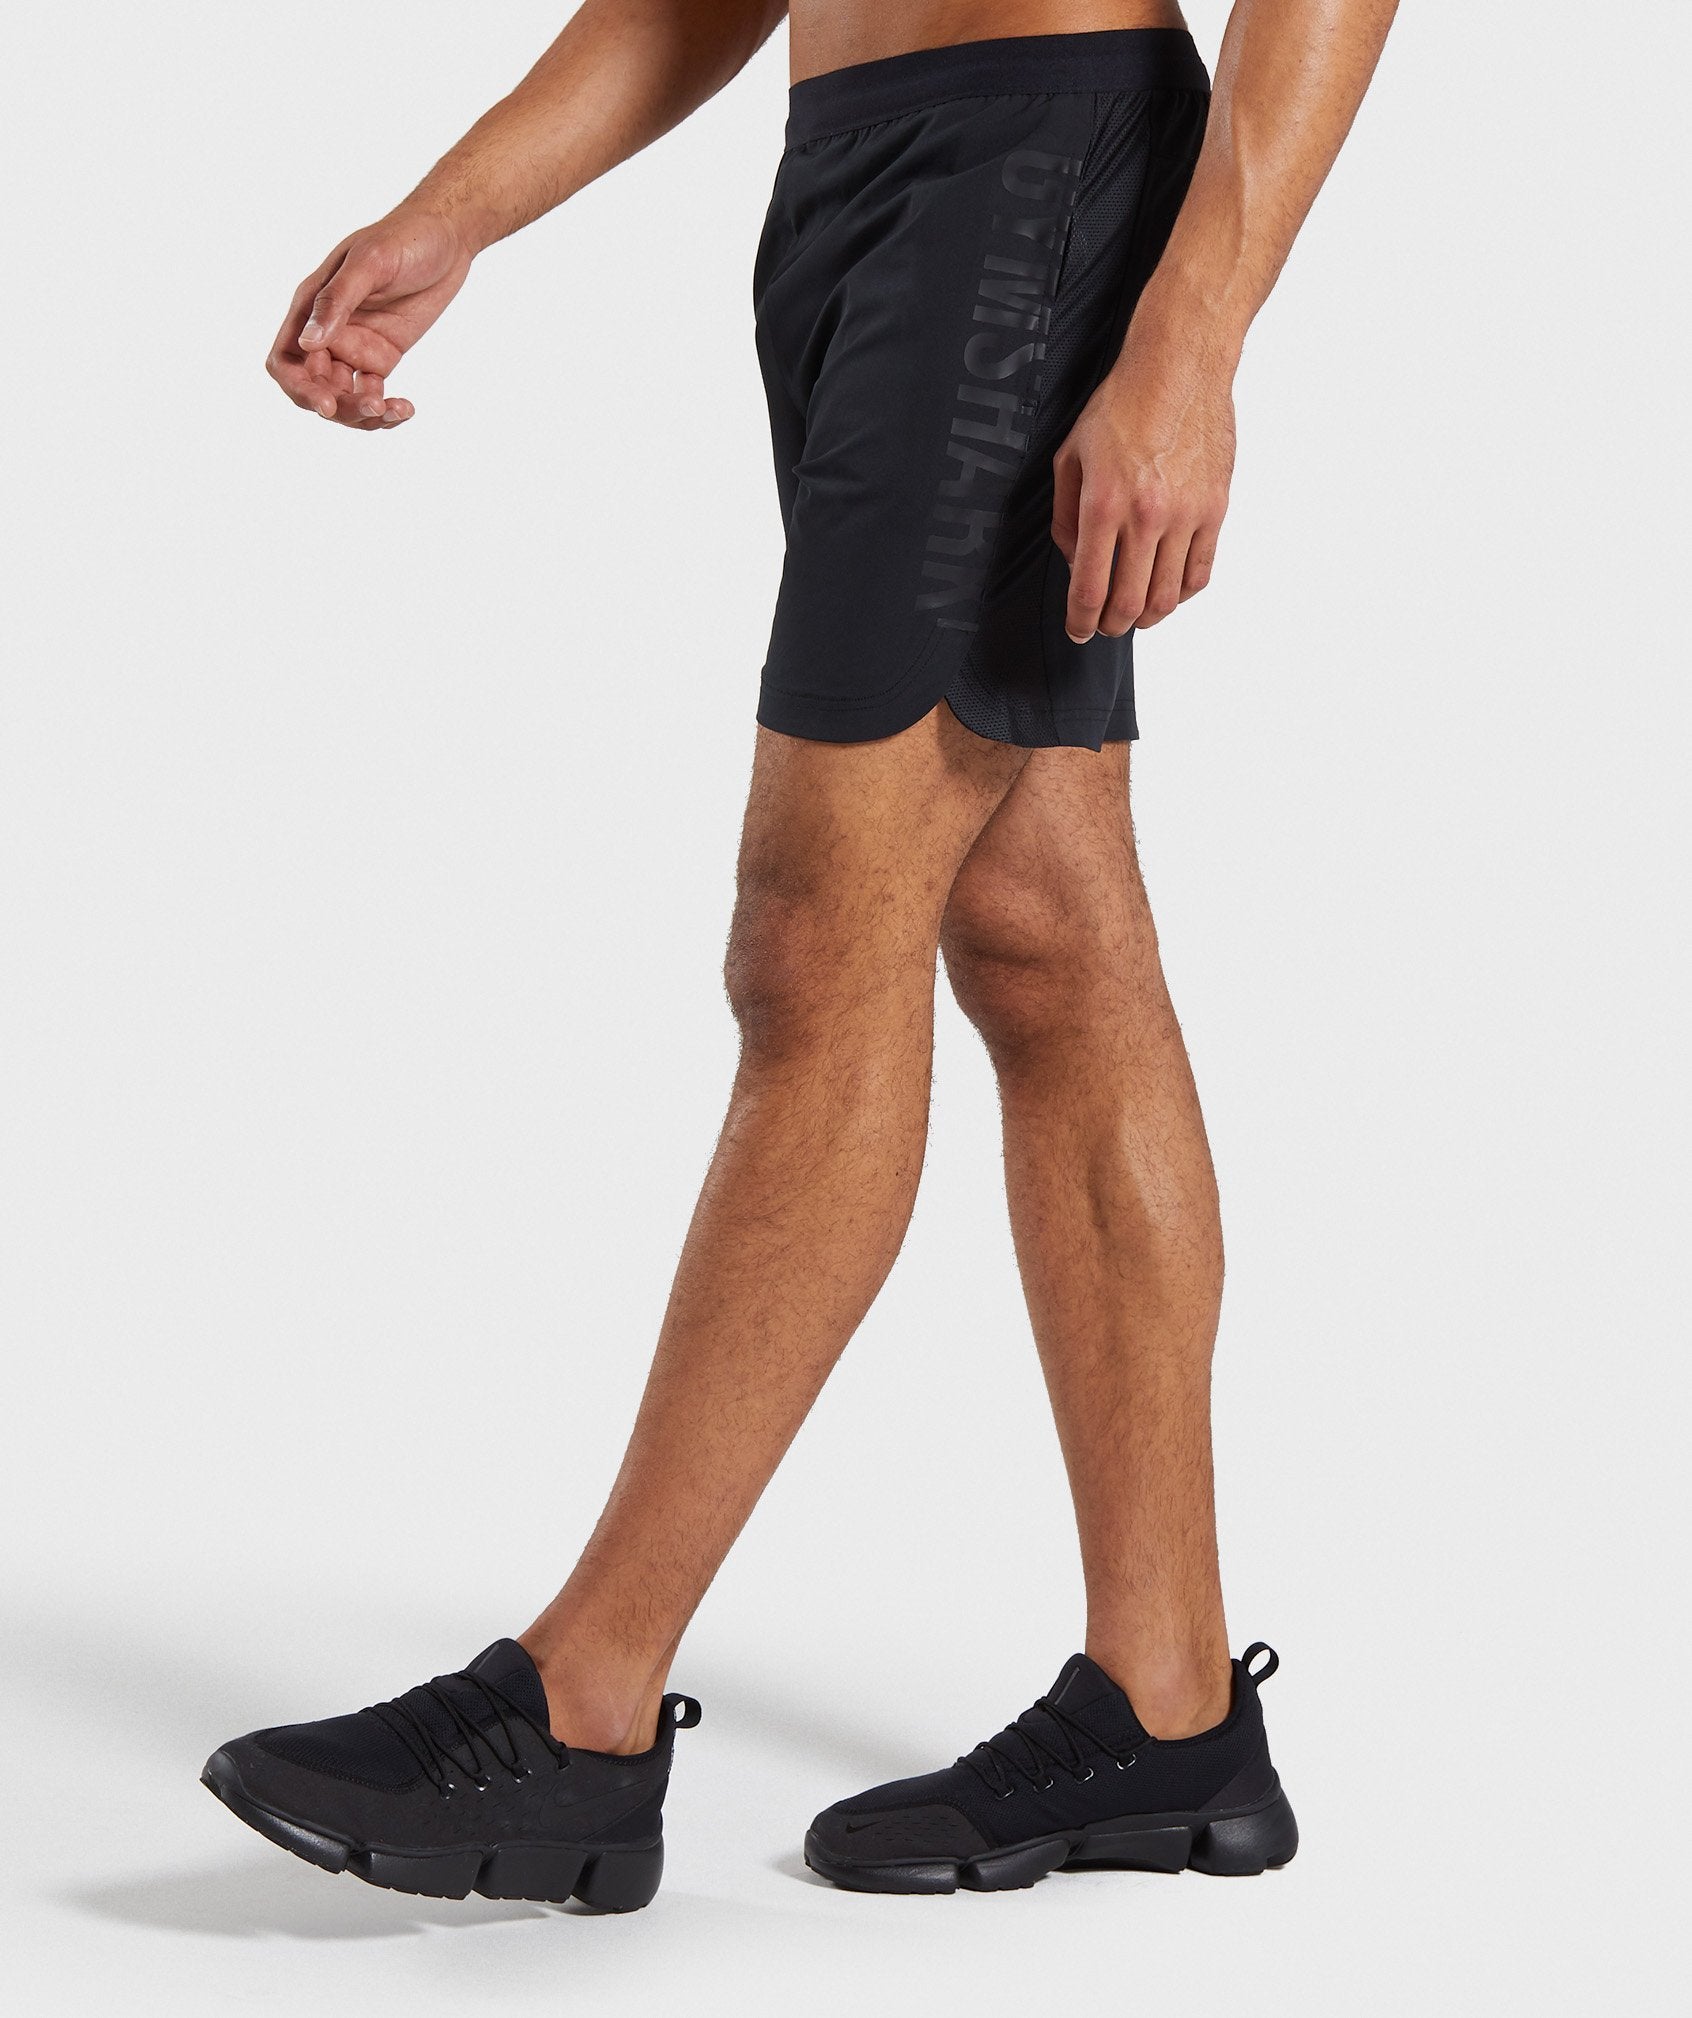 Shadow Shorts in Black - view 3